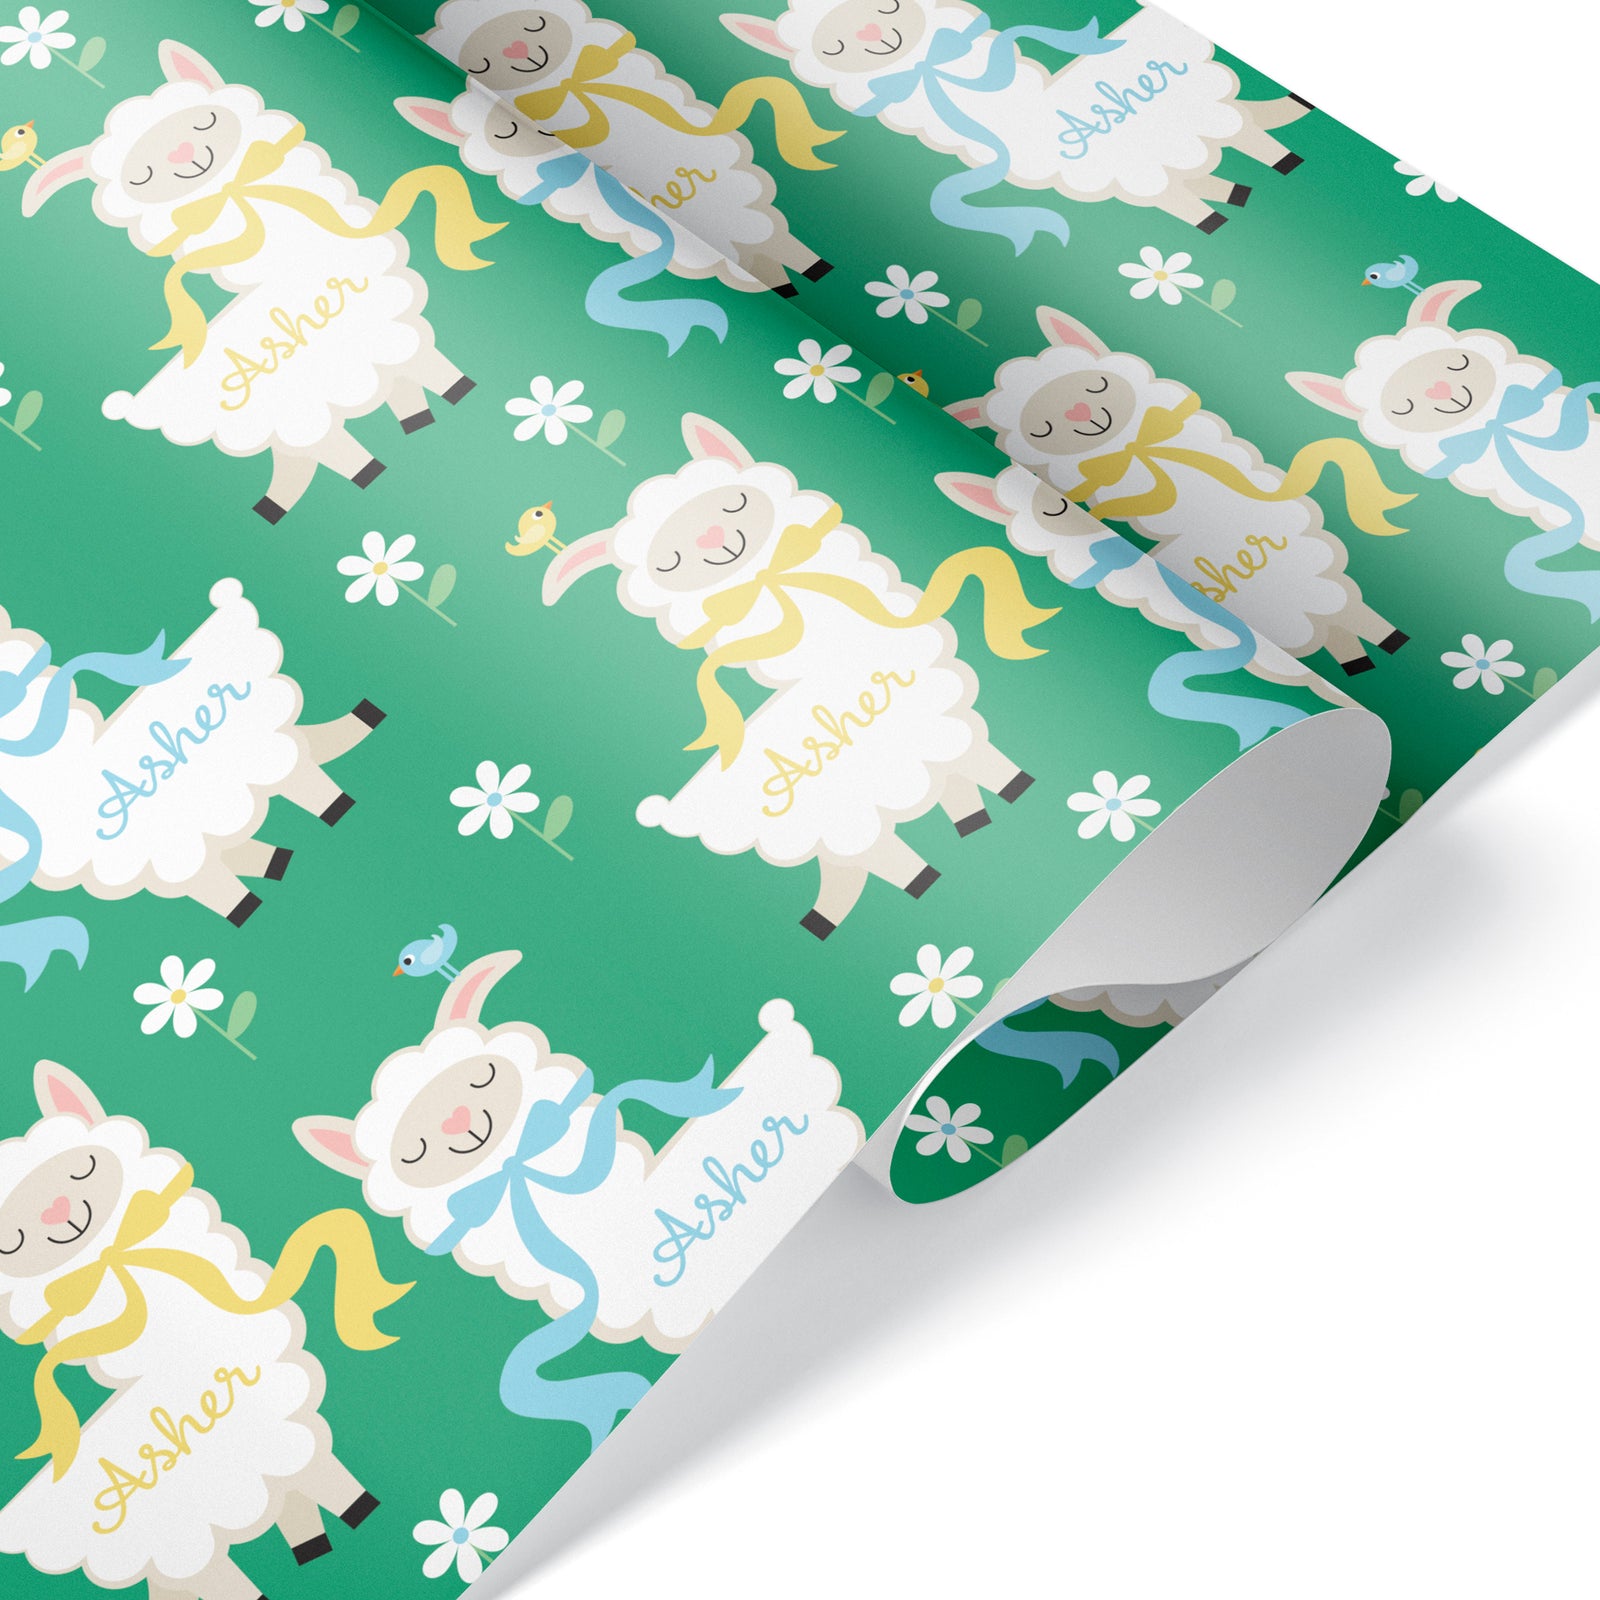 Sheep Personalized Name Baby Shower Wrapping Paper - Pastel Baby - Graphic  Spaces